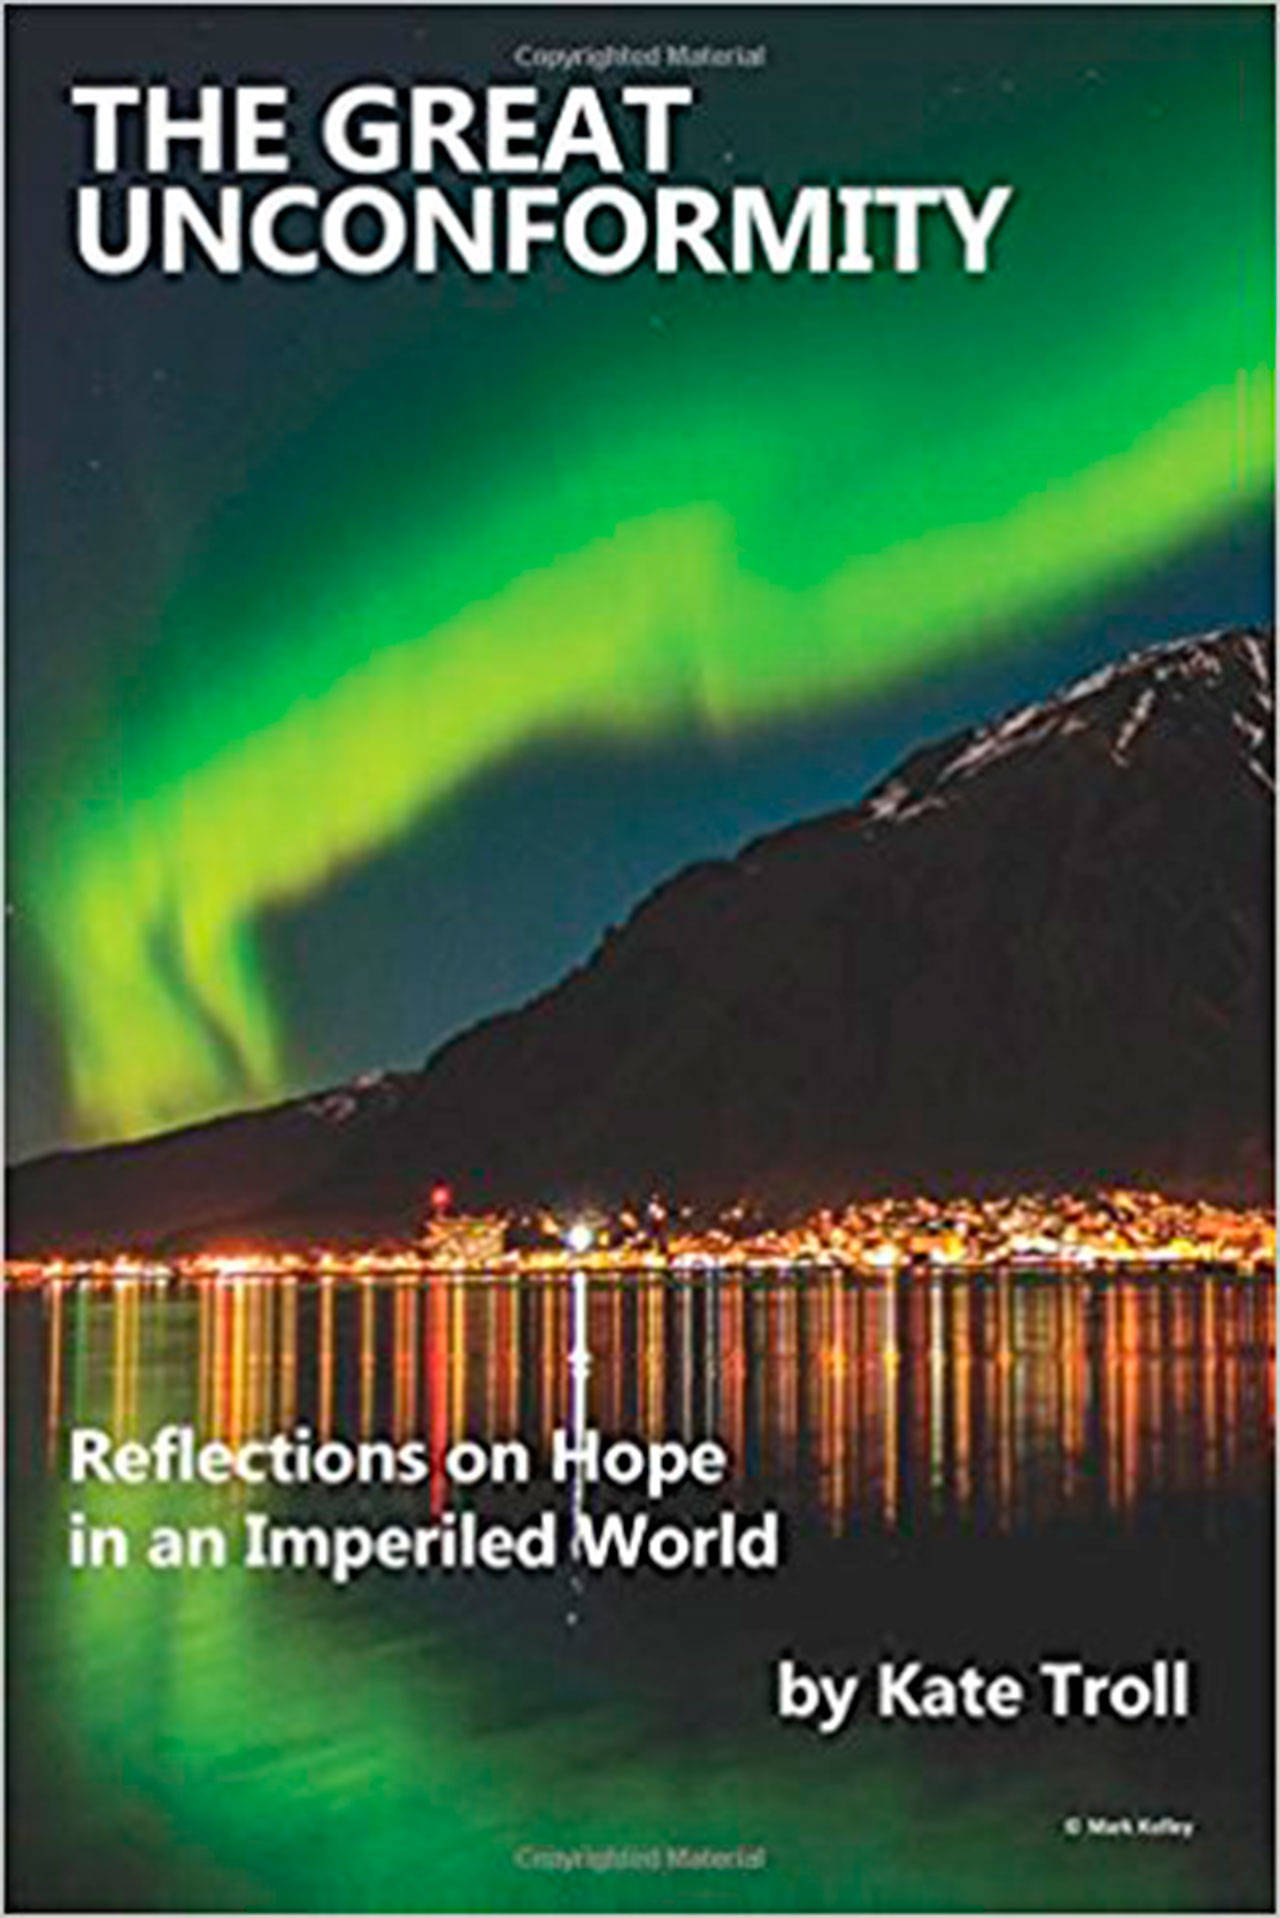 Image courtesy of Eagle Harbor Book Company | Eagle Harbor Book Company will host Alaskan author Kate Troll to discuss her book “The Great Unconformity: Reflections on Hope in an Imperiled World” at 3 p.m. Sunday, Oct. 22.